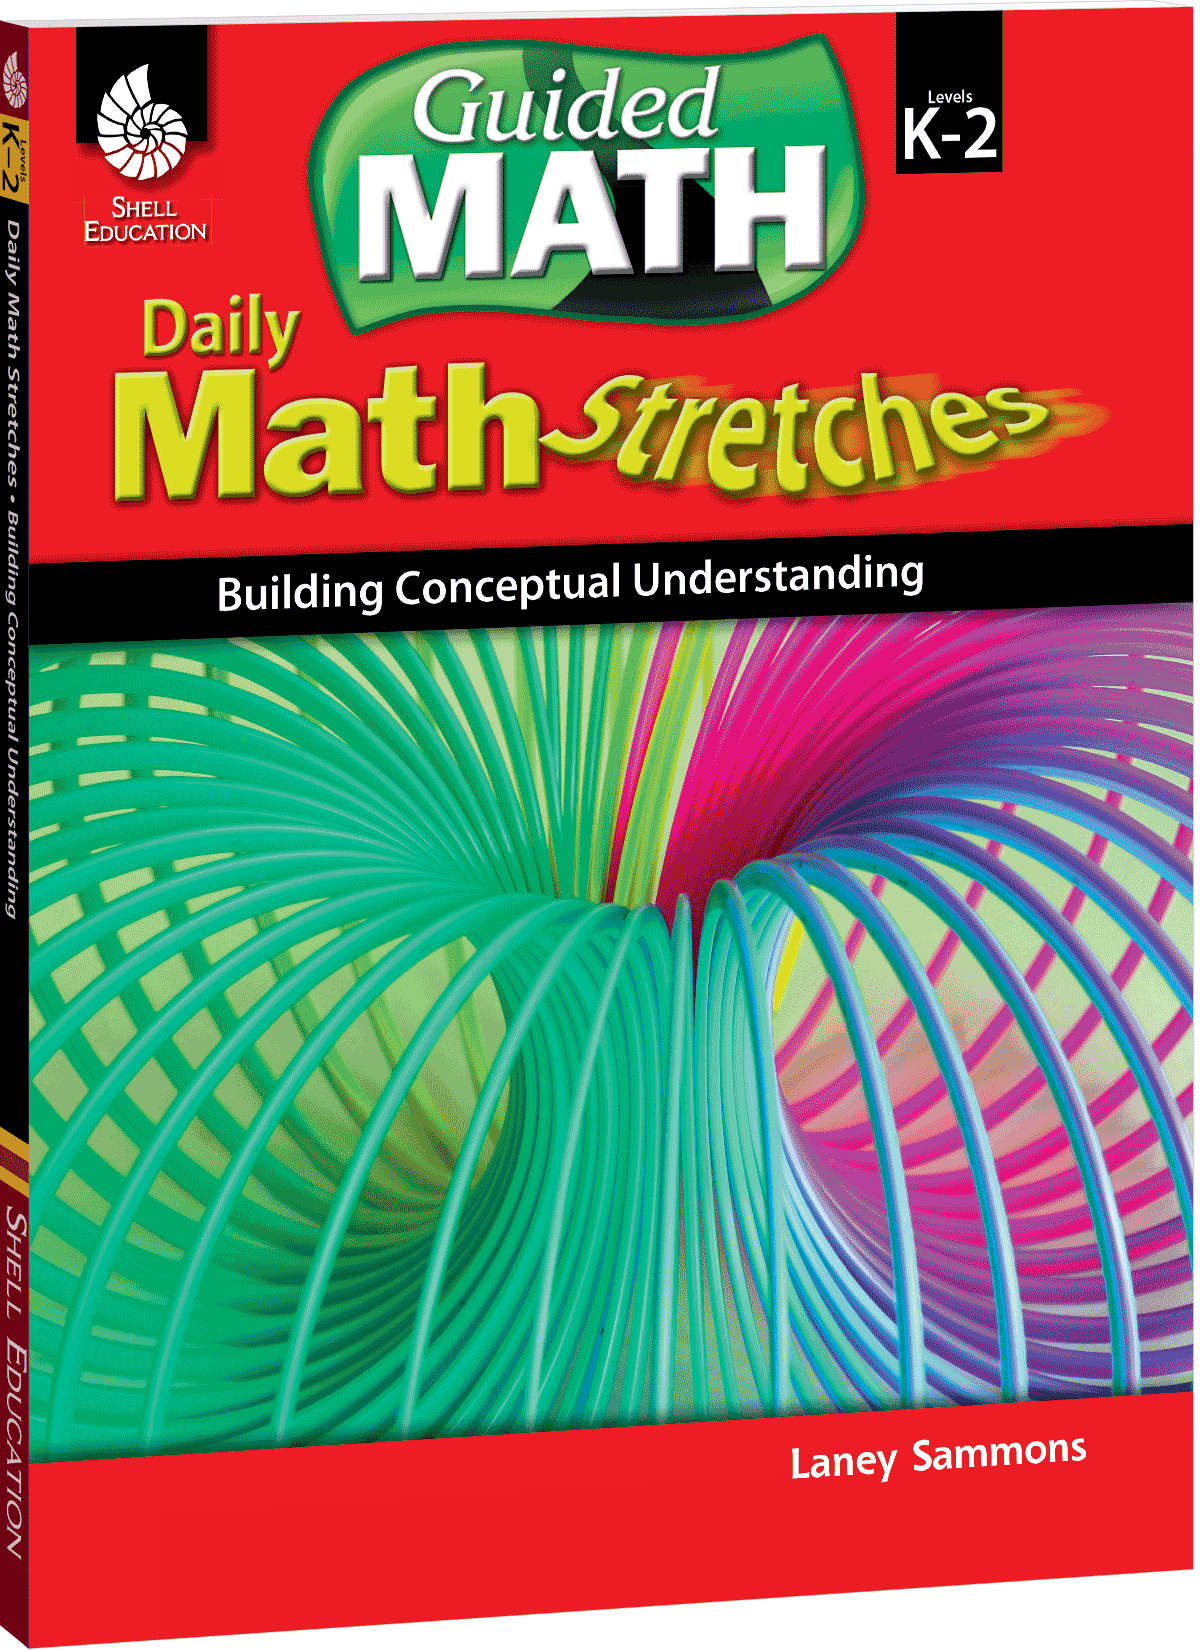 Levels　Created　Understanding　Daily　Materials　Building　K-2　Math　Teacher　Stretches:　Conceptual